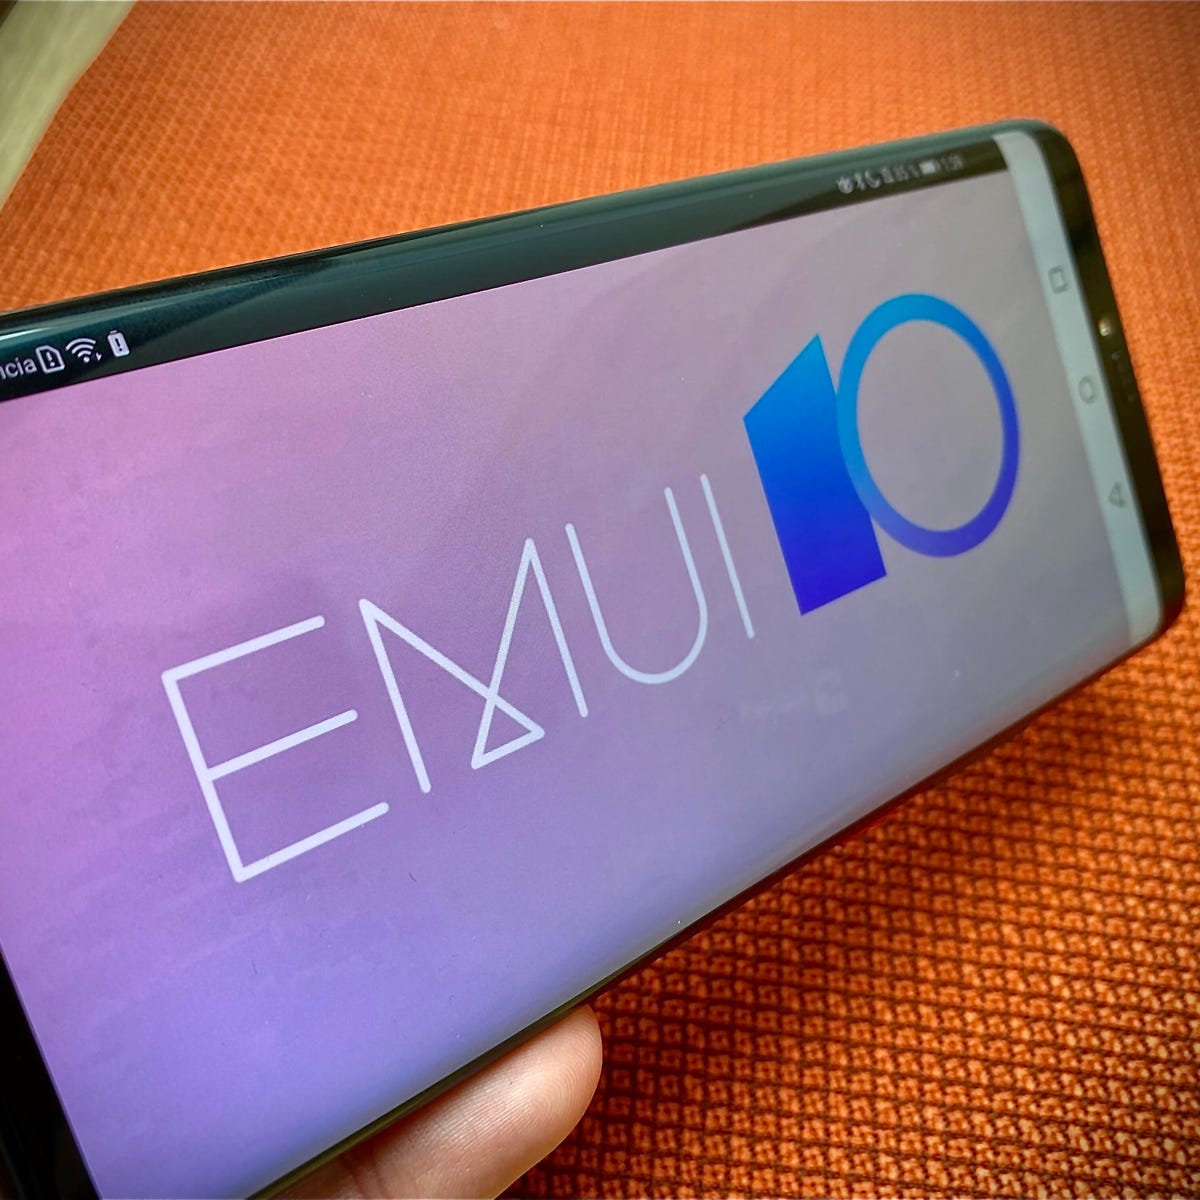 bladzijde Bot werk Huawei EMUI 10 Android skin update is available but some phones can't  download it - CNET